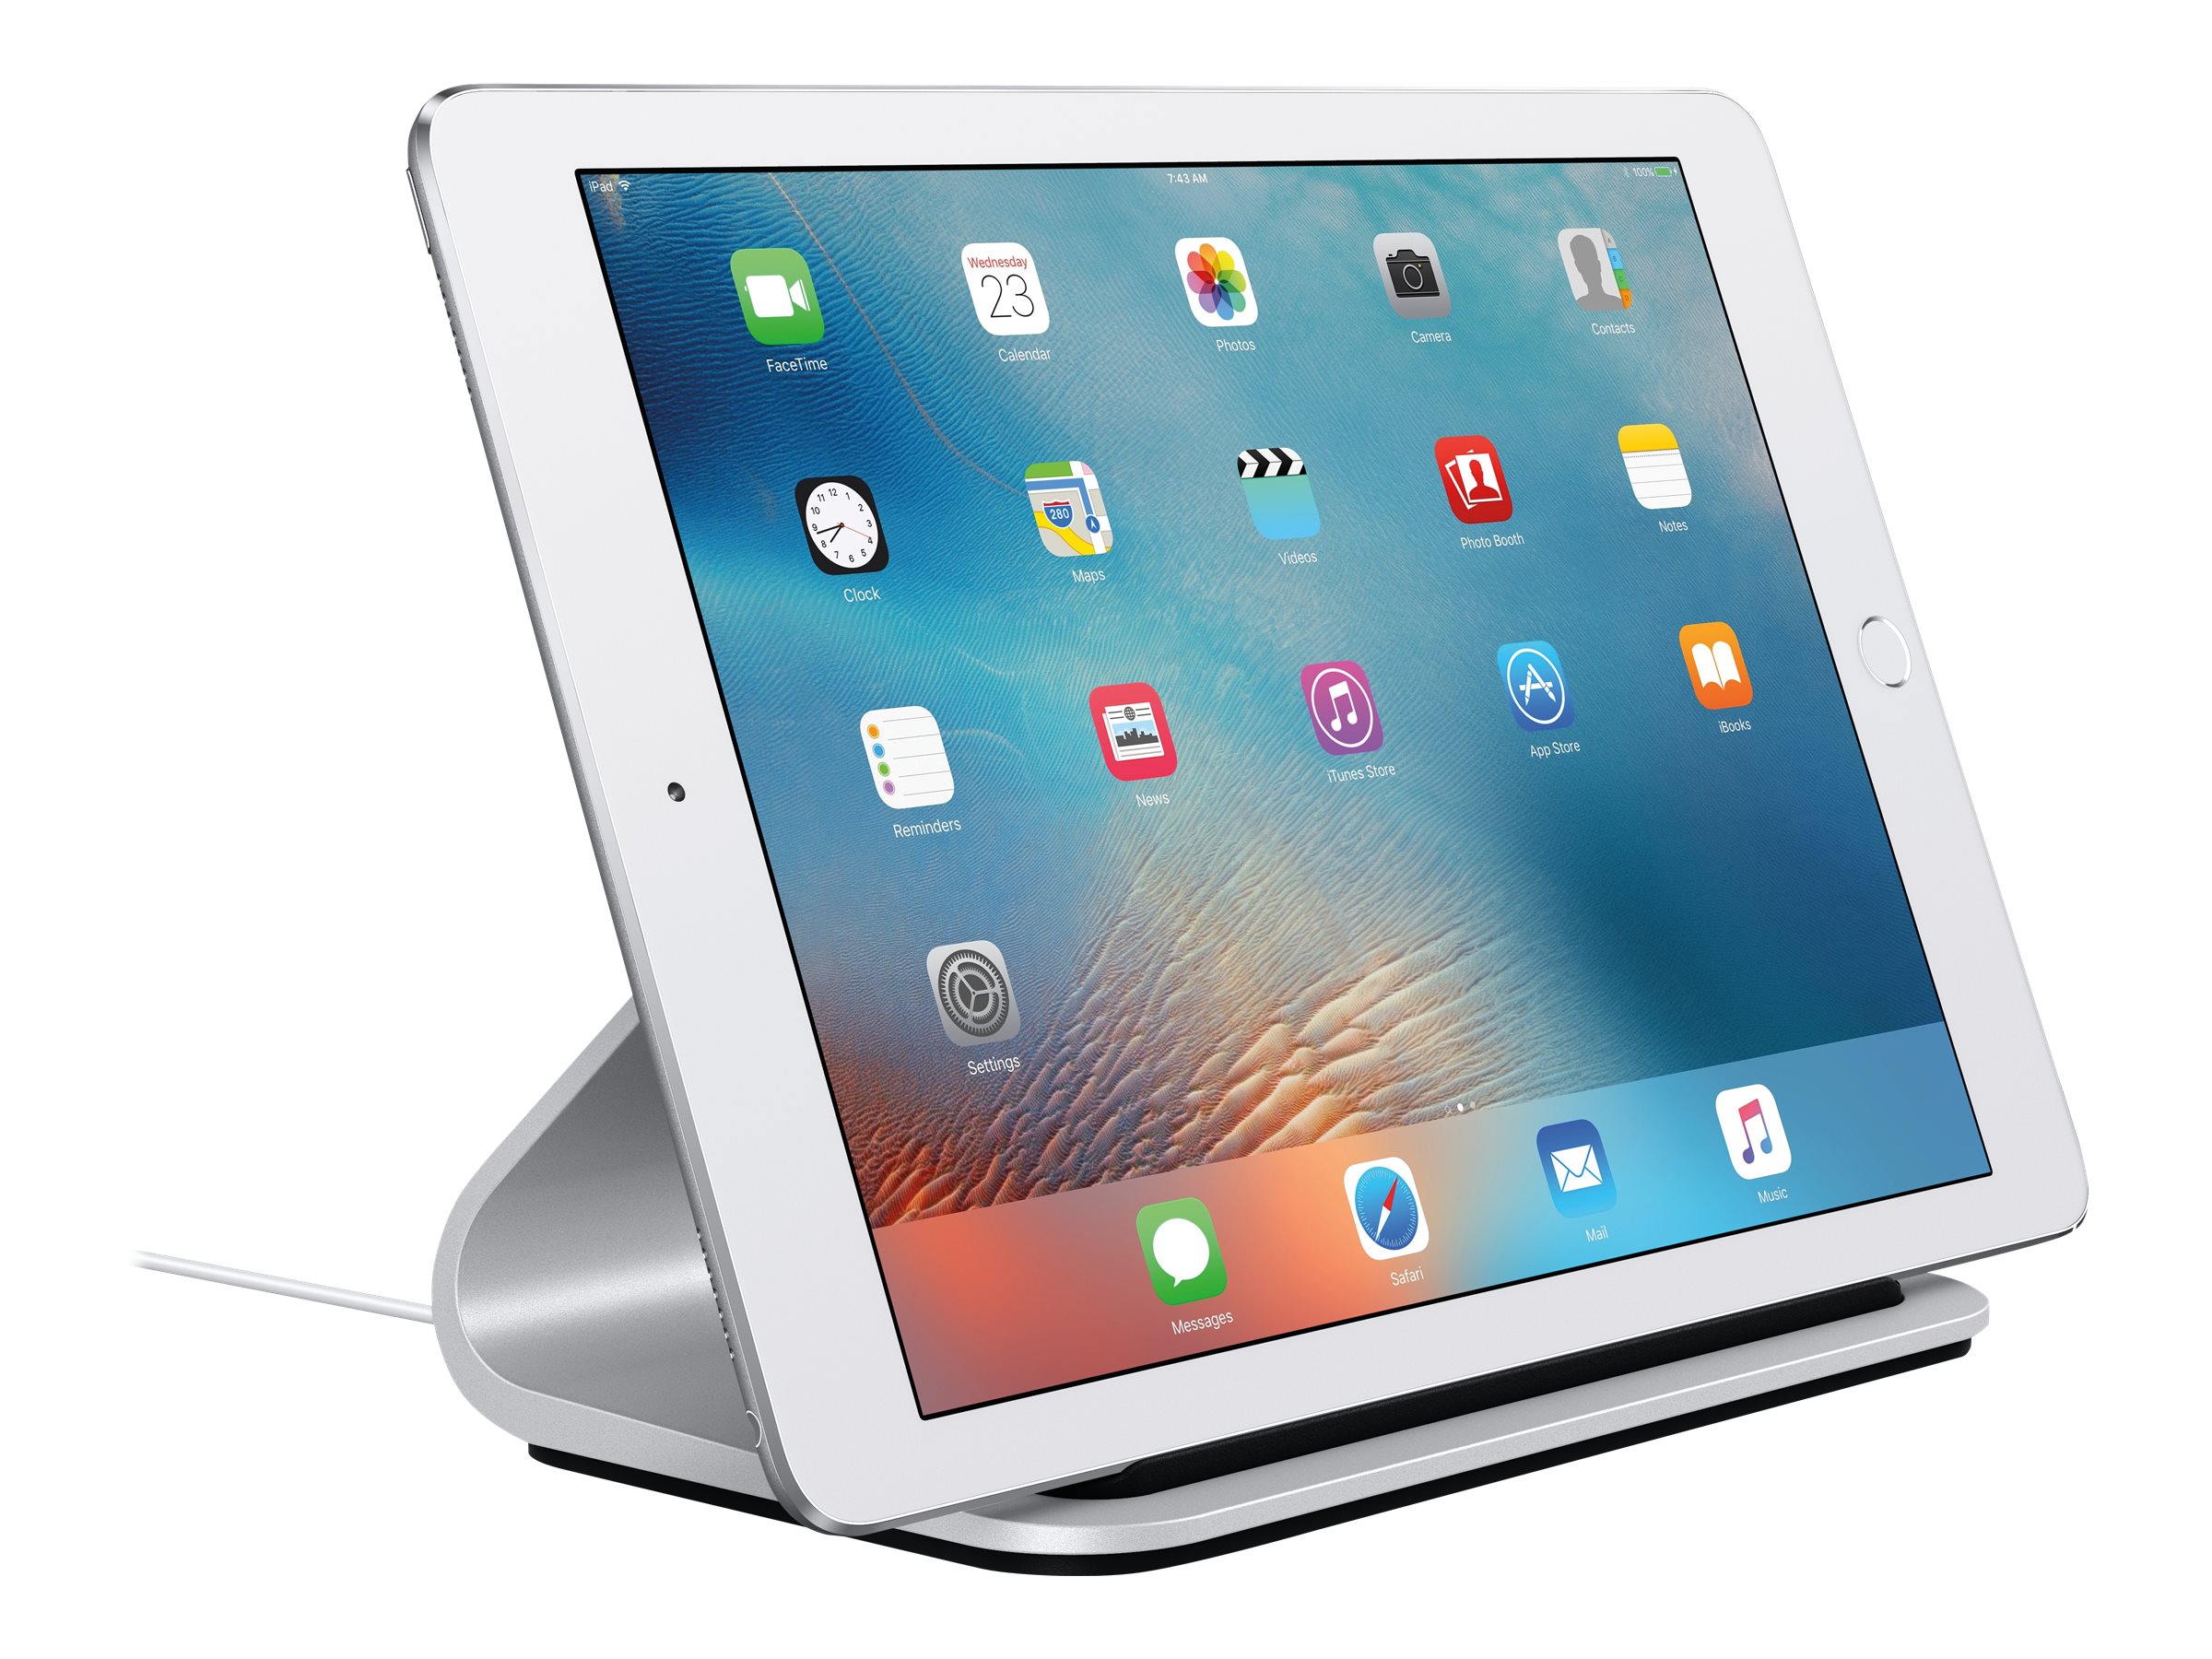 Logitech Base Charging Stand for iPad, iPad Pro, and iPad Air